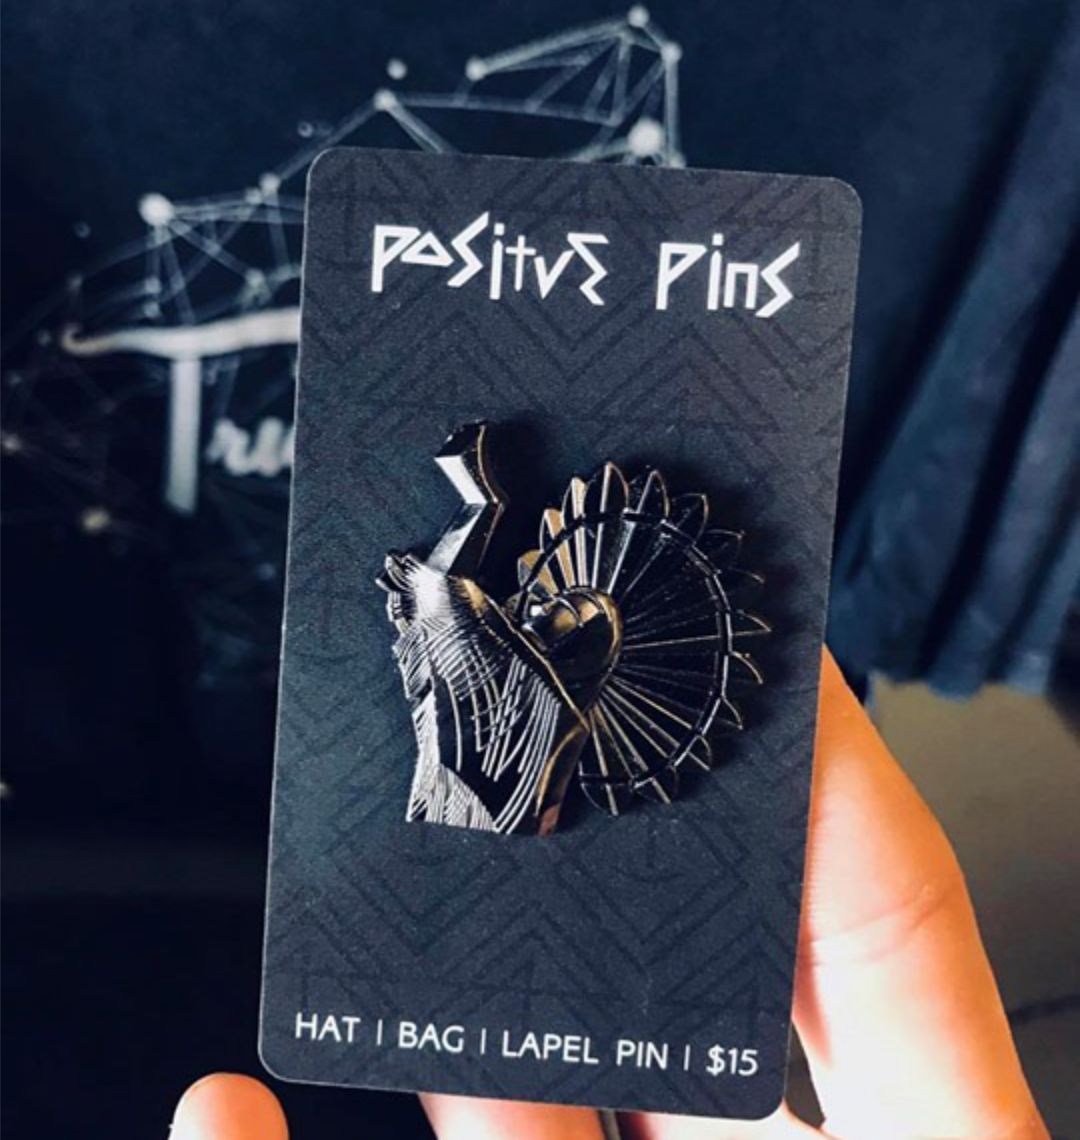 Retail - Keeper - Positive Pin